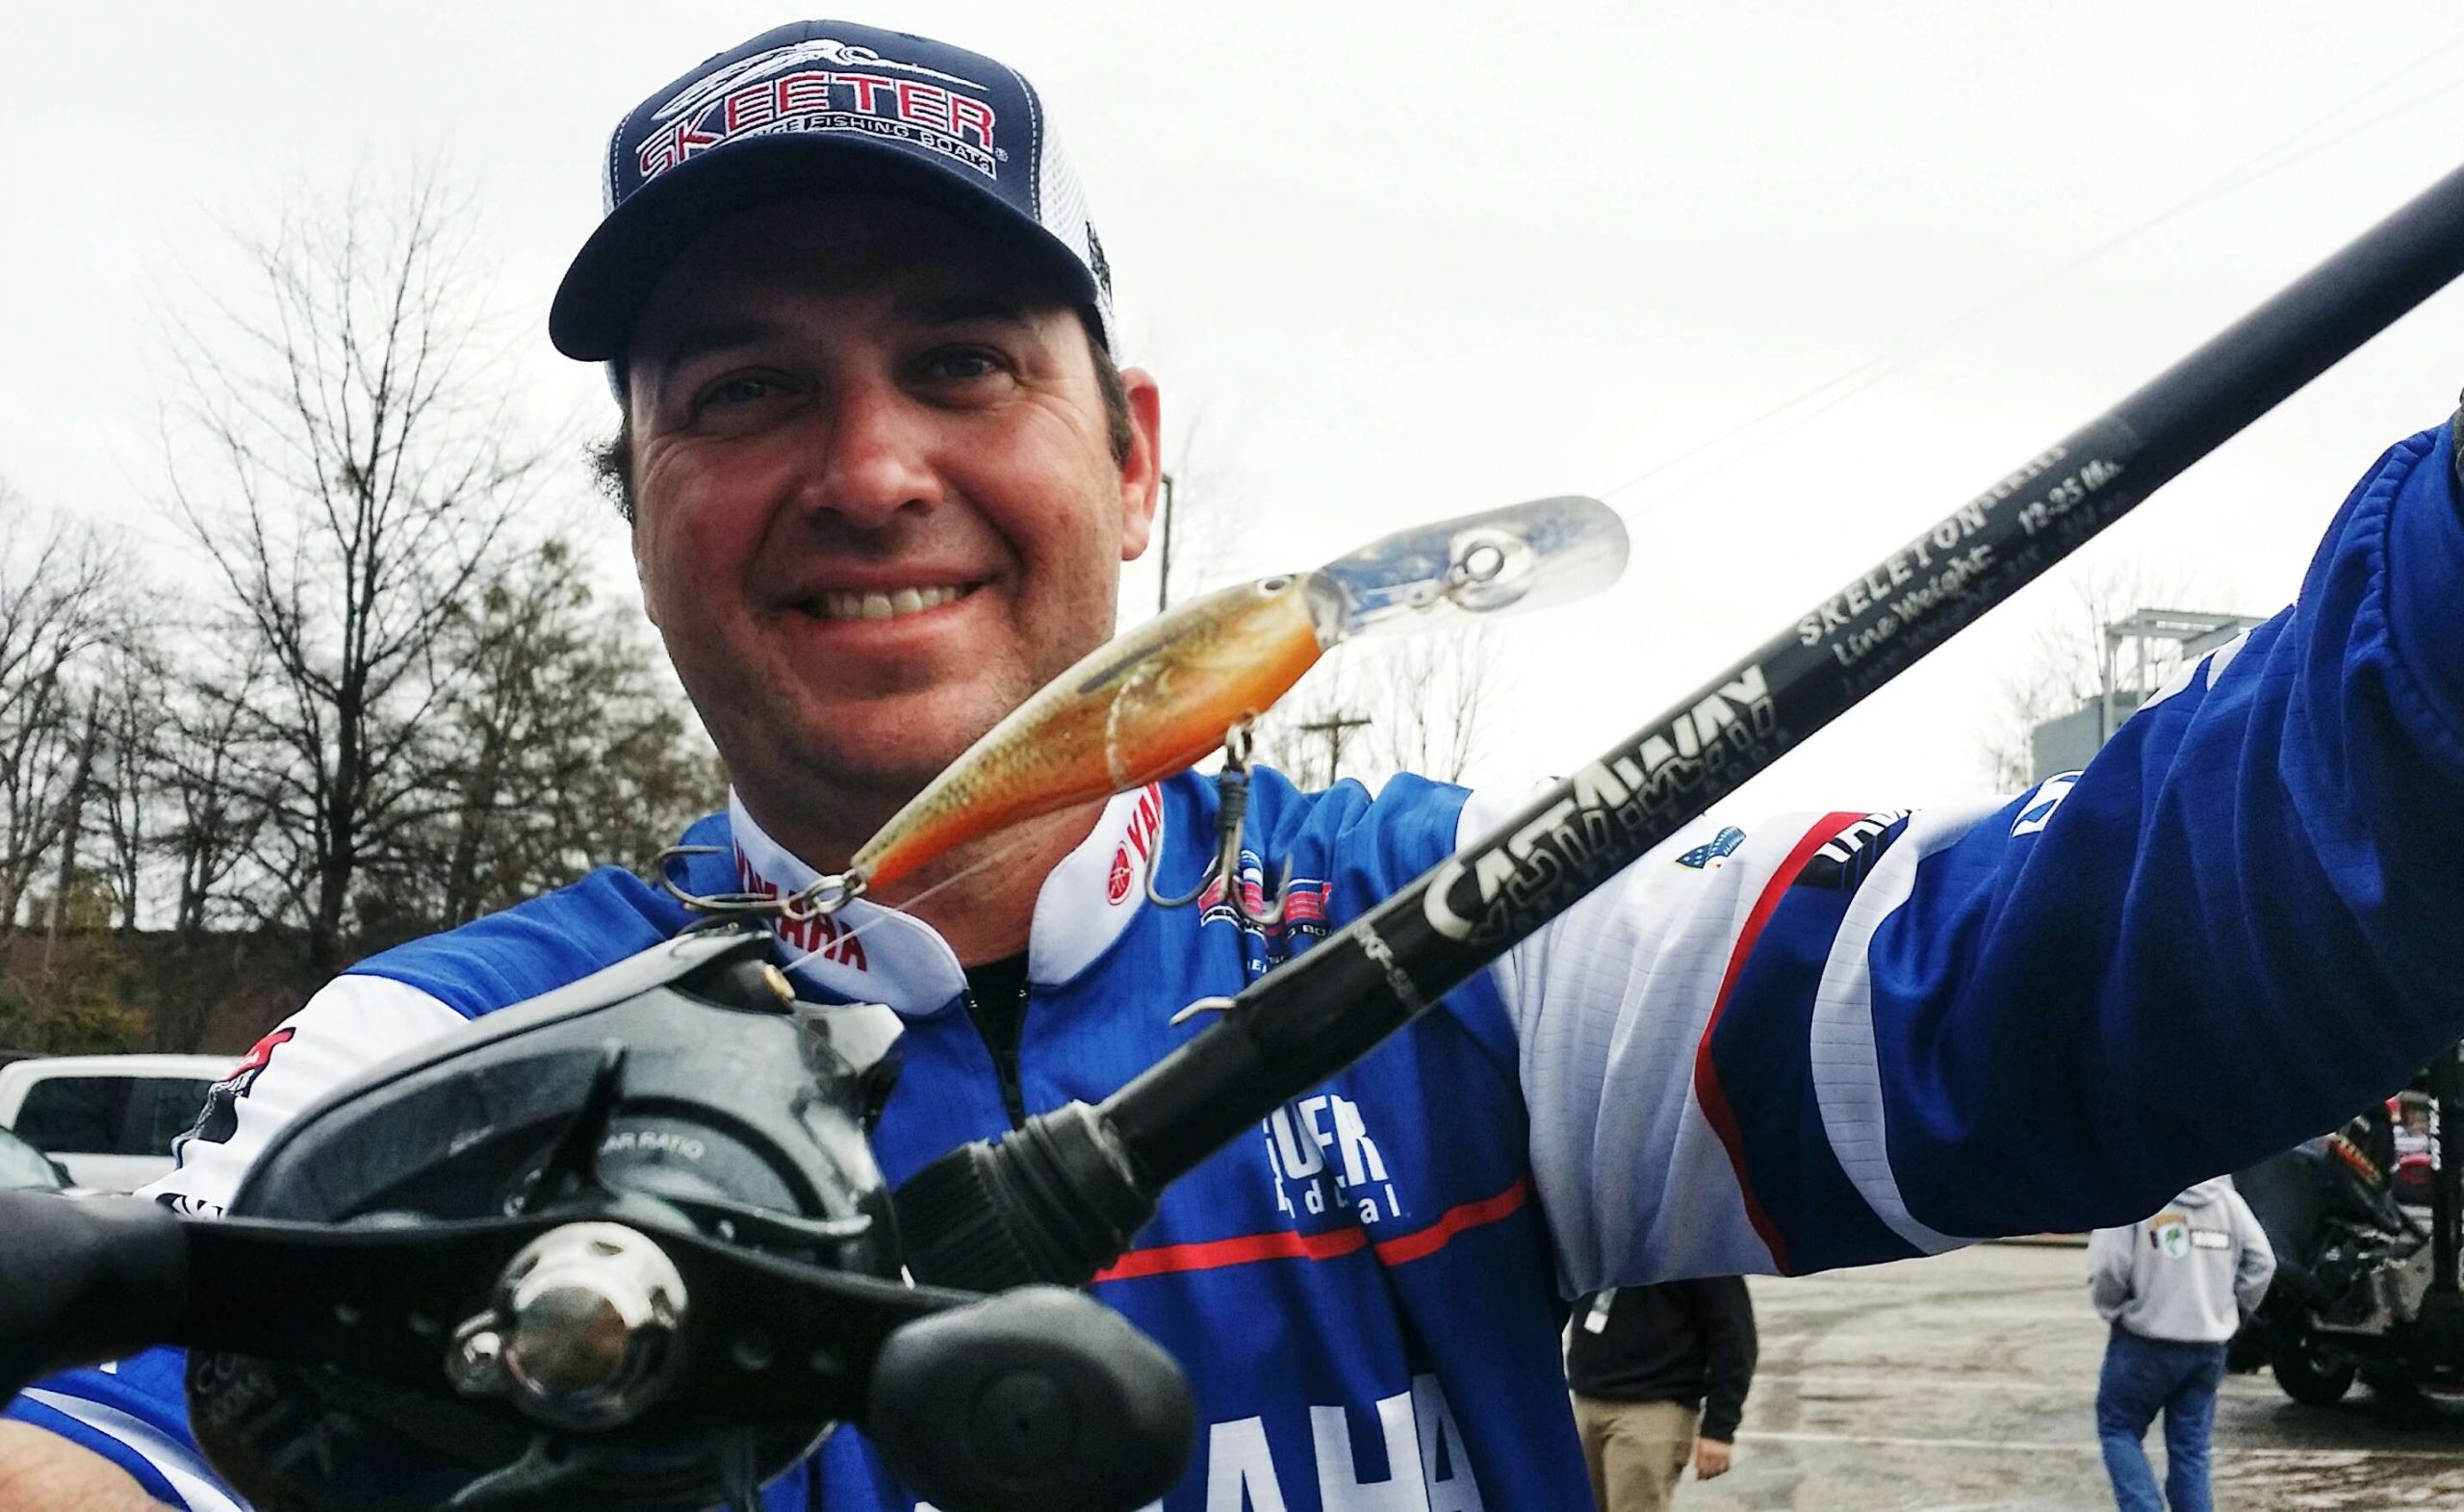 Todd Faircloth fished mid-lake and down-lake creeks, channel-swing points with rock. All his fish came on a Strike King Pro Model Lucky Shad (orange bream).